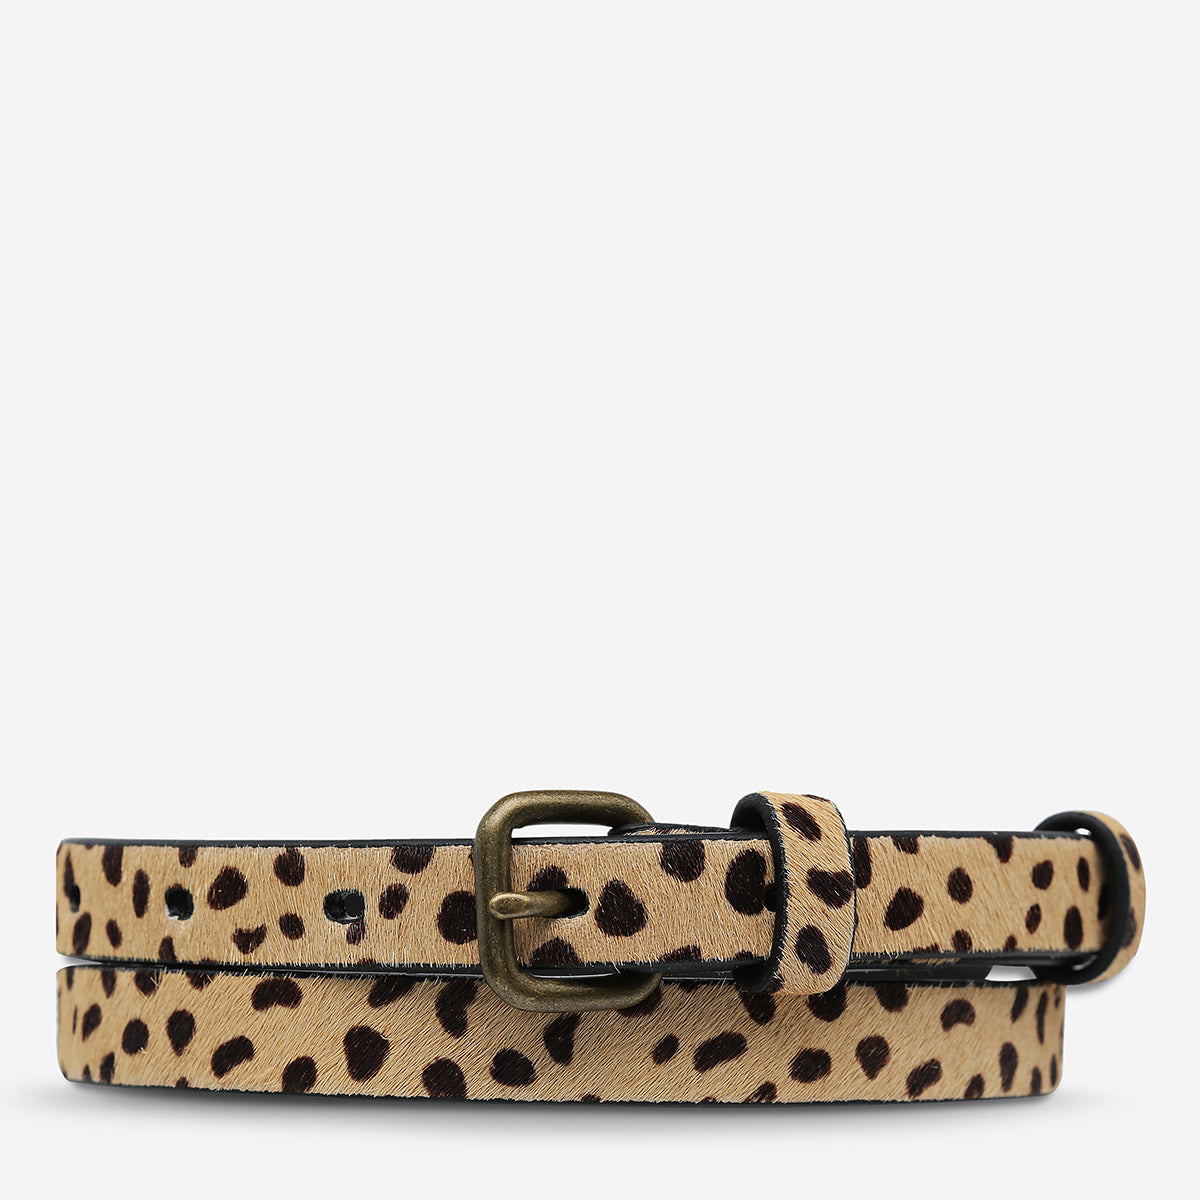 Only Lovers Left Cheetah Belt - Status Anxiety - Mandi at Home